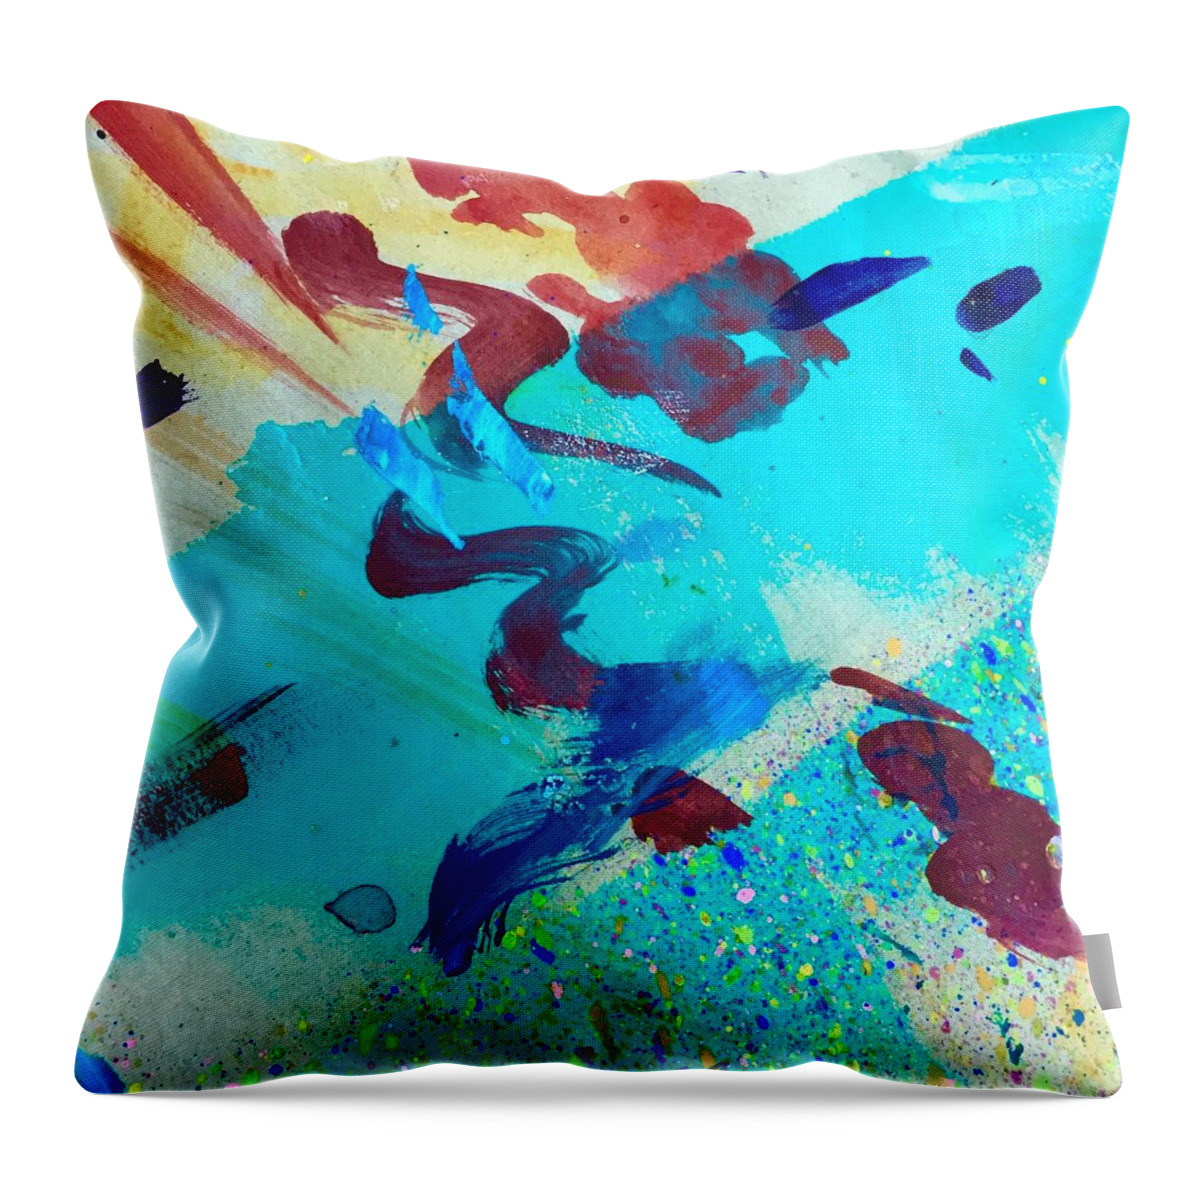 Abstract Throw Pillow featuring the painting Squiggles And stripes by Darice Machel McGuire